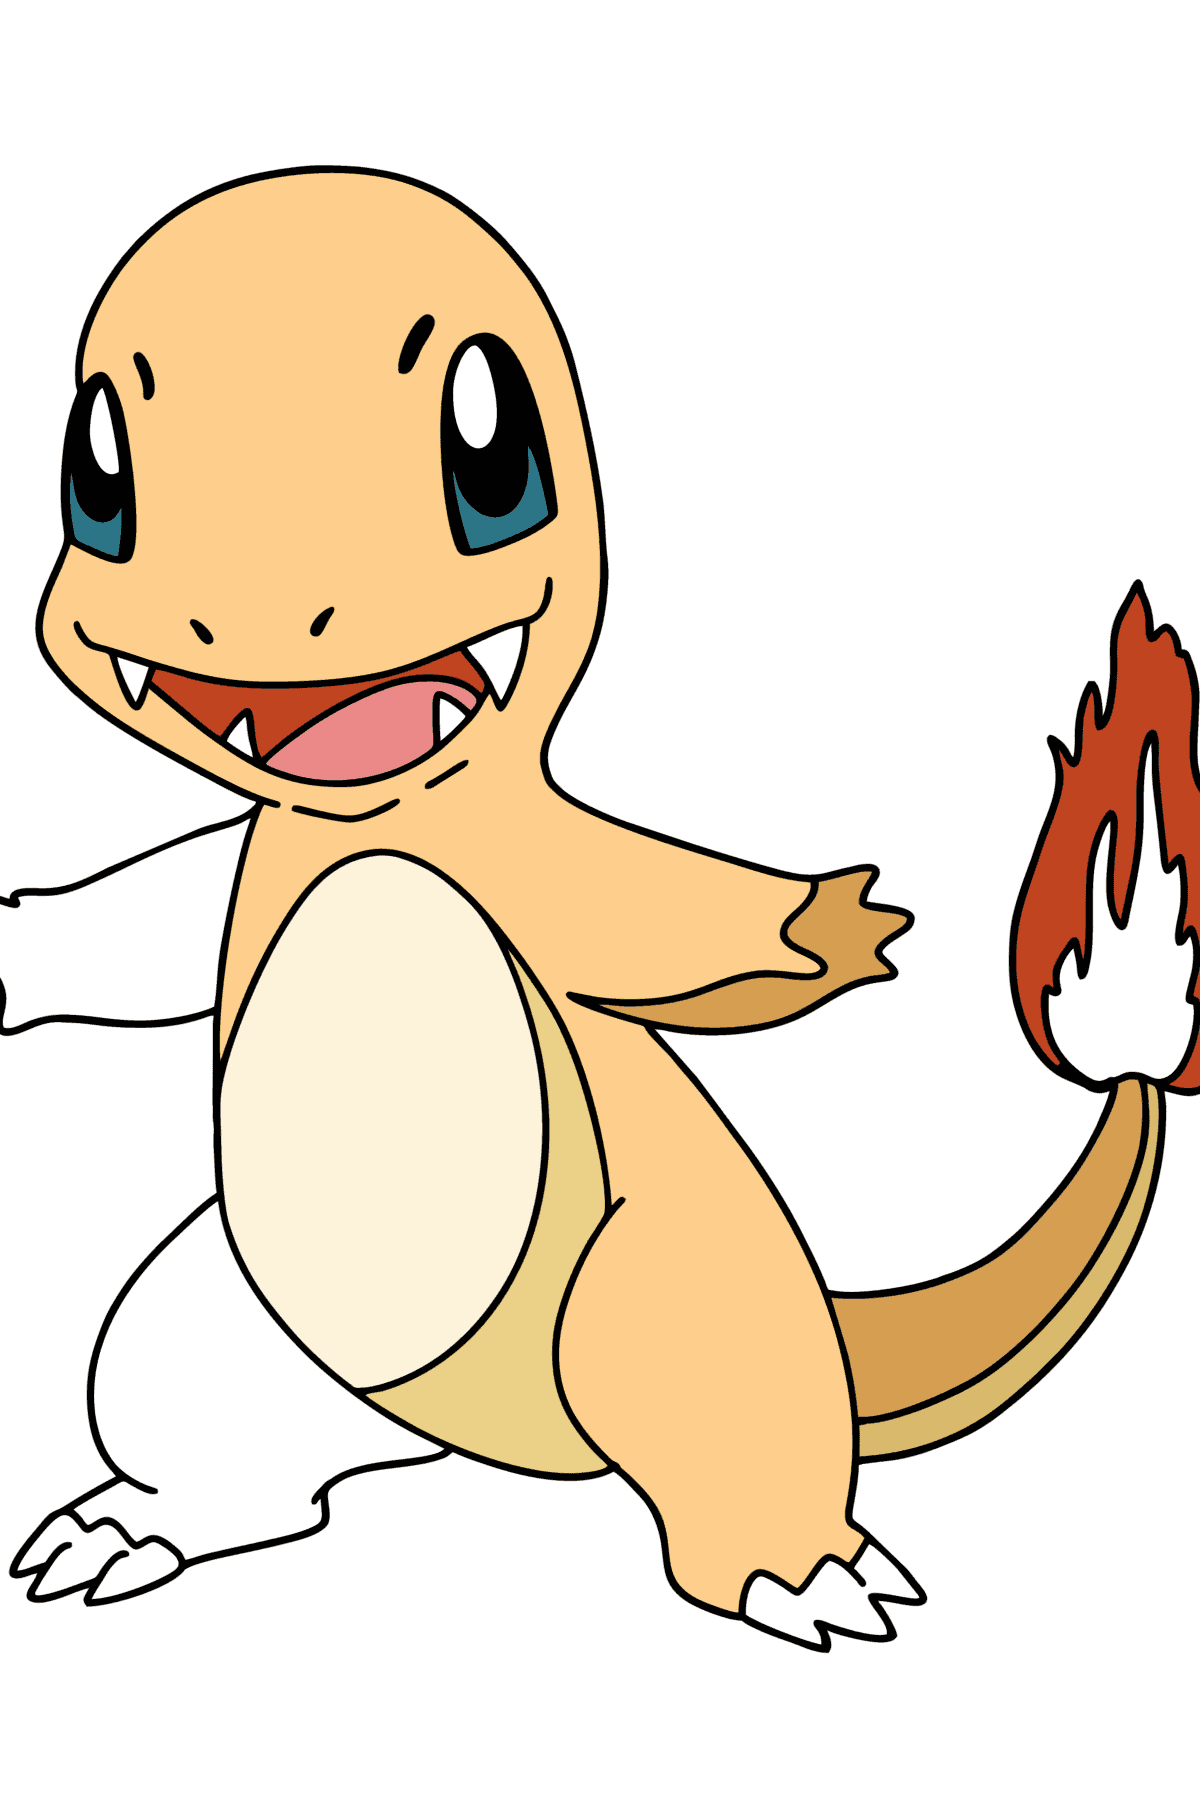 Pokémon Go Charmander coloring page - Coloring Pages for Kids